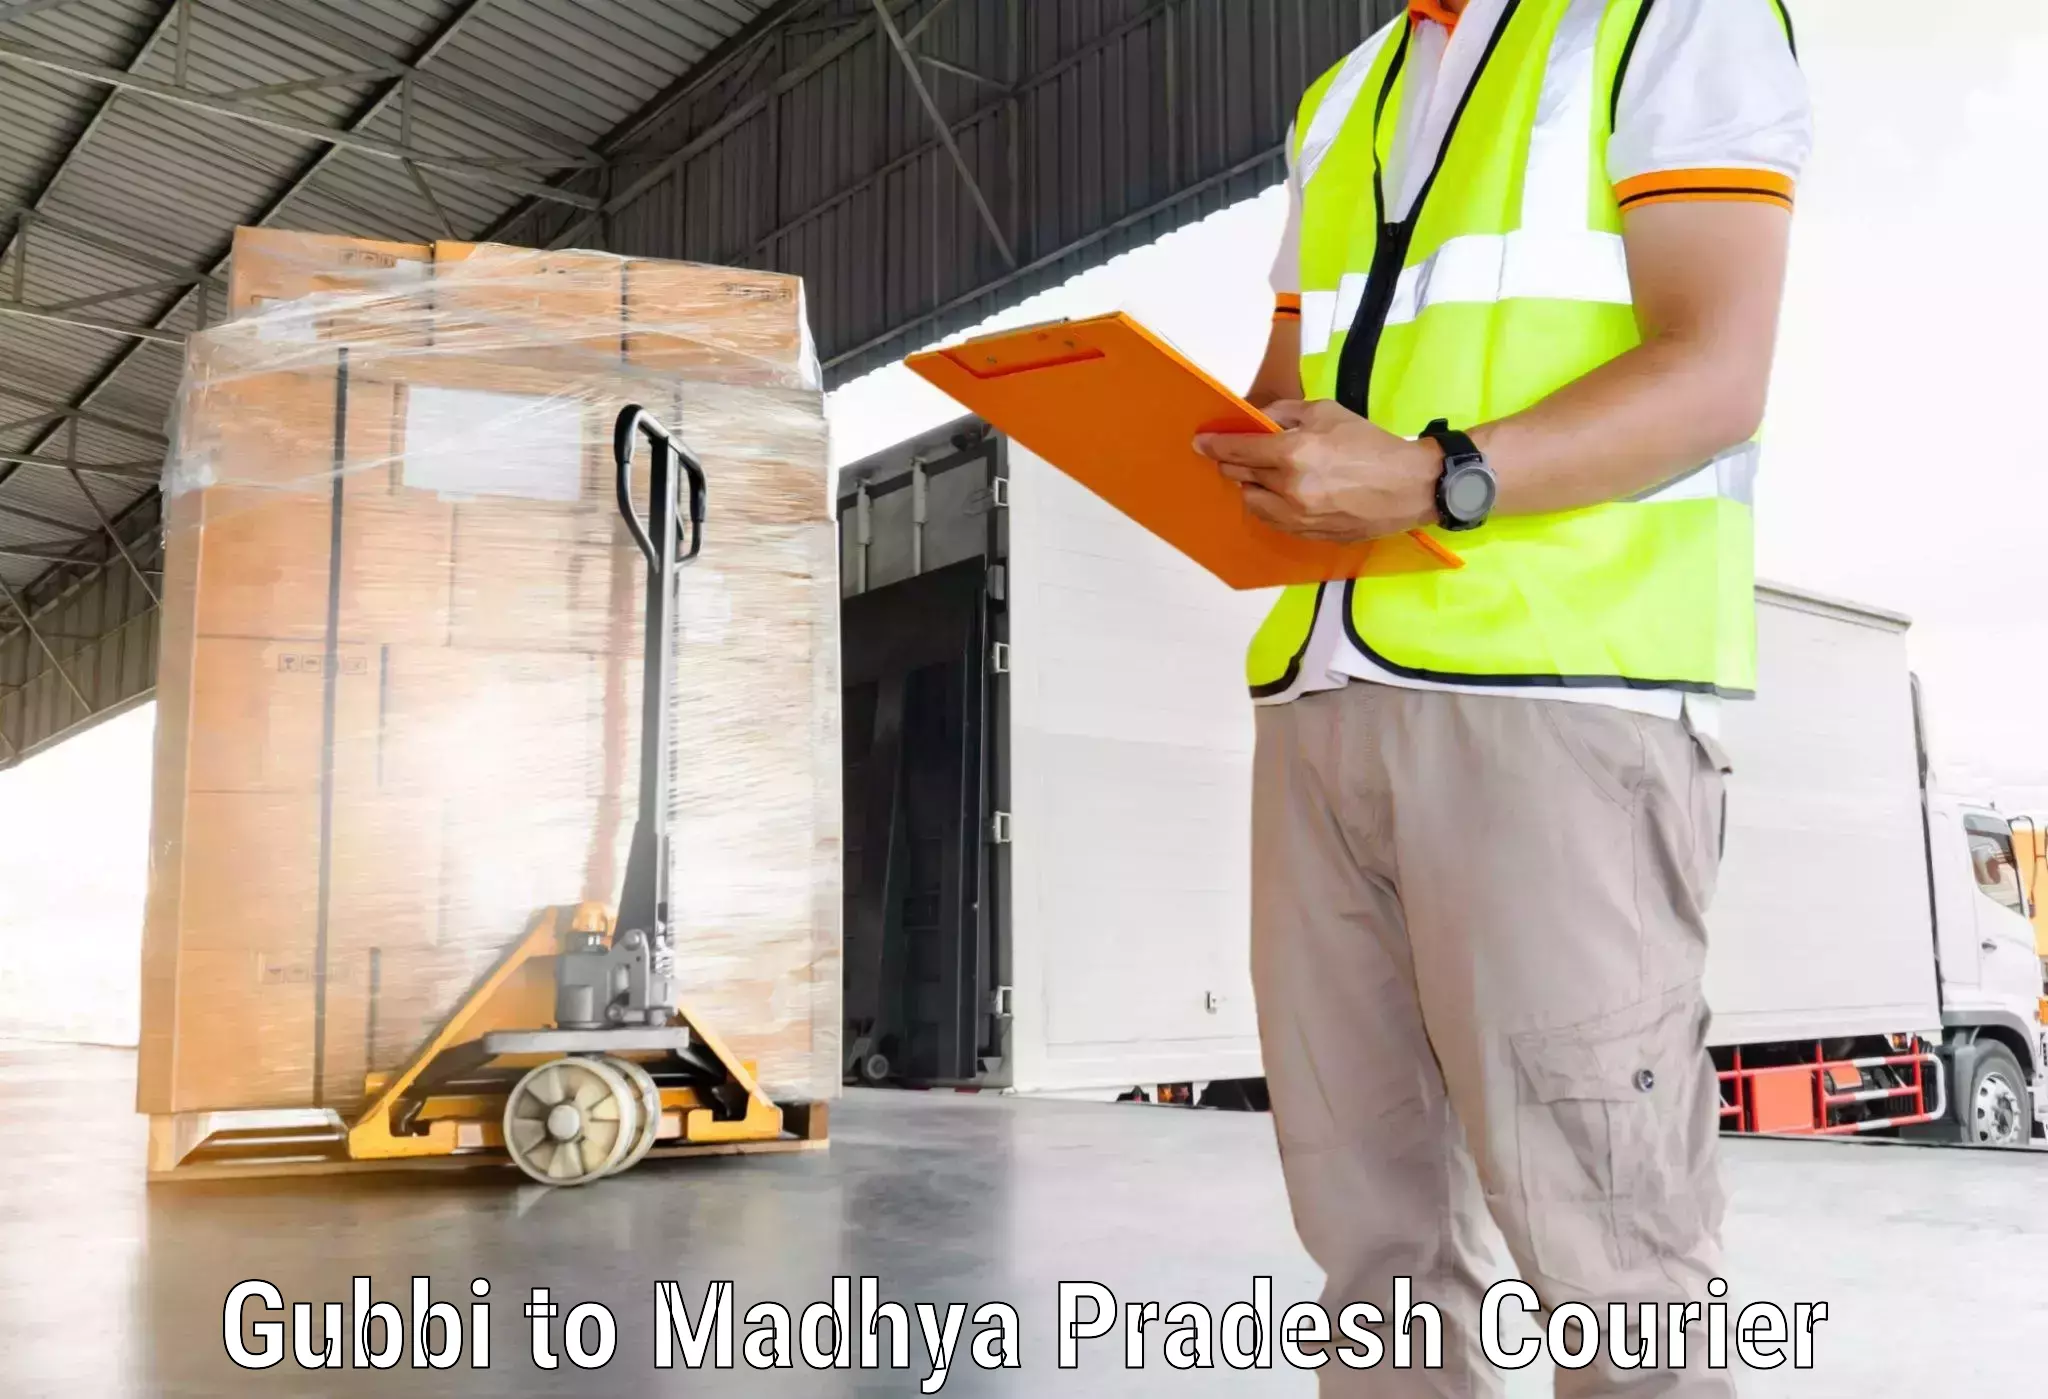 Professional courier services in Gubbi to Hatta